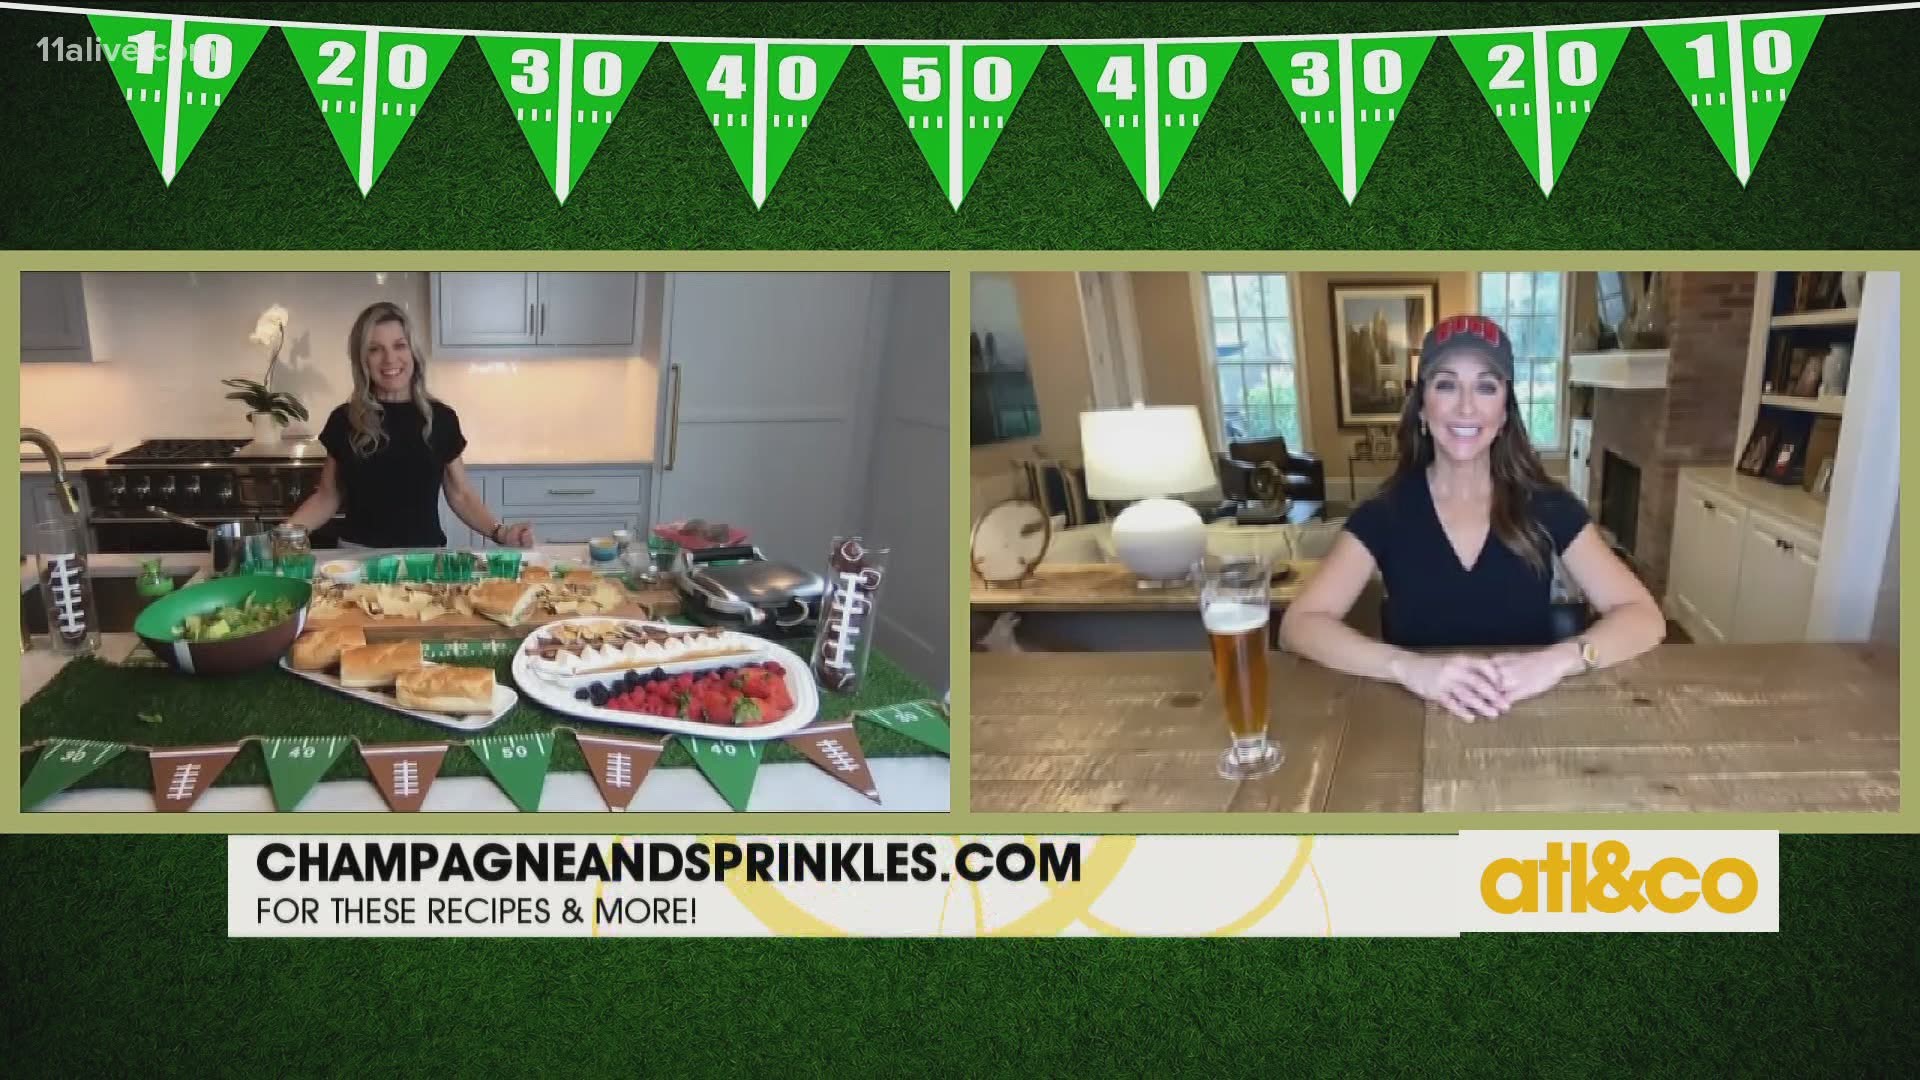 Lifestyle contributor Michelle Lee from entertaining blog 'Champagne & Sprinkles' shares a winning spread with signature eats from both teams in the big game.